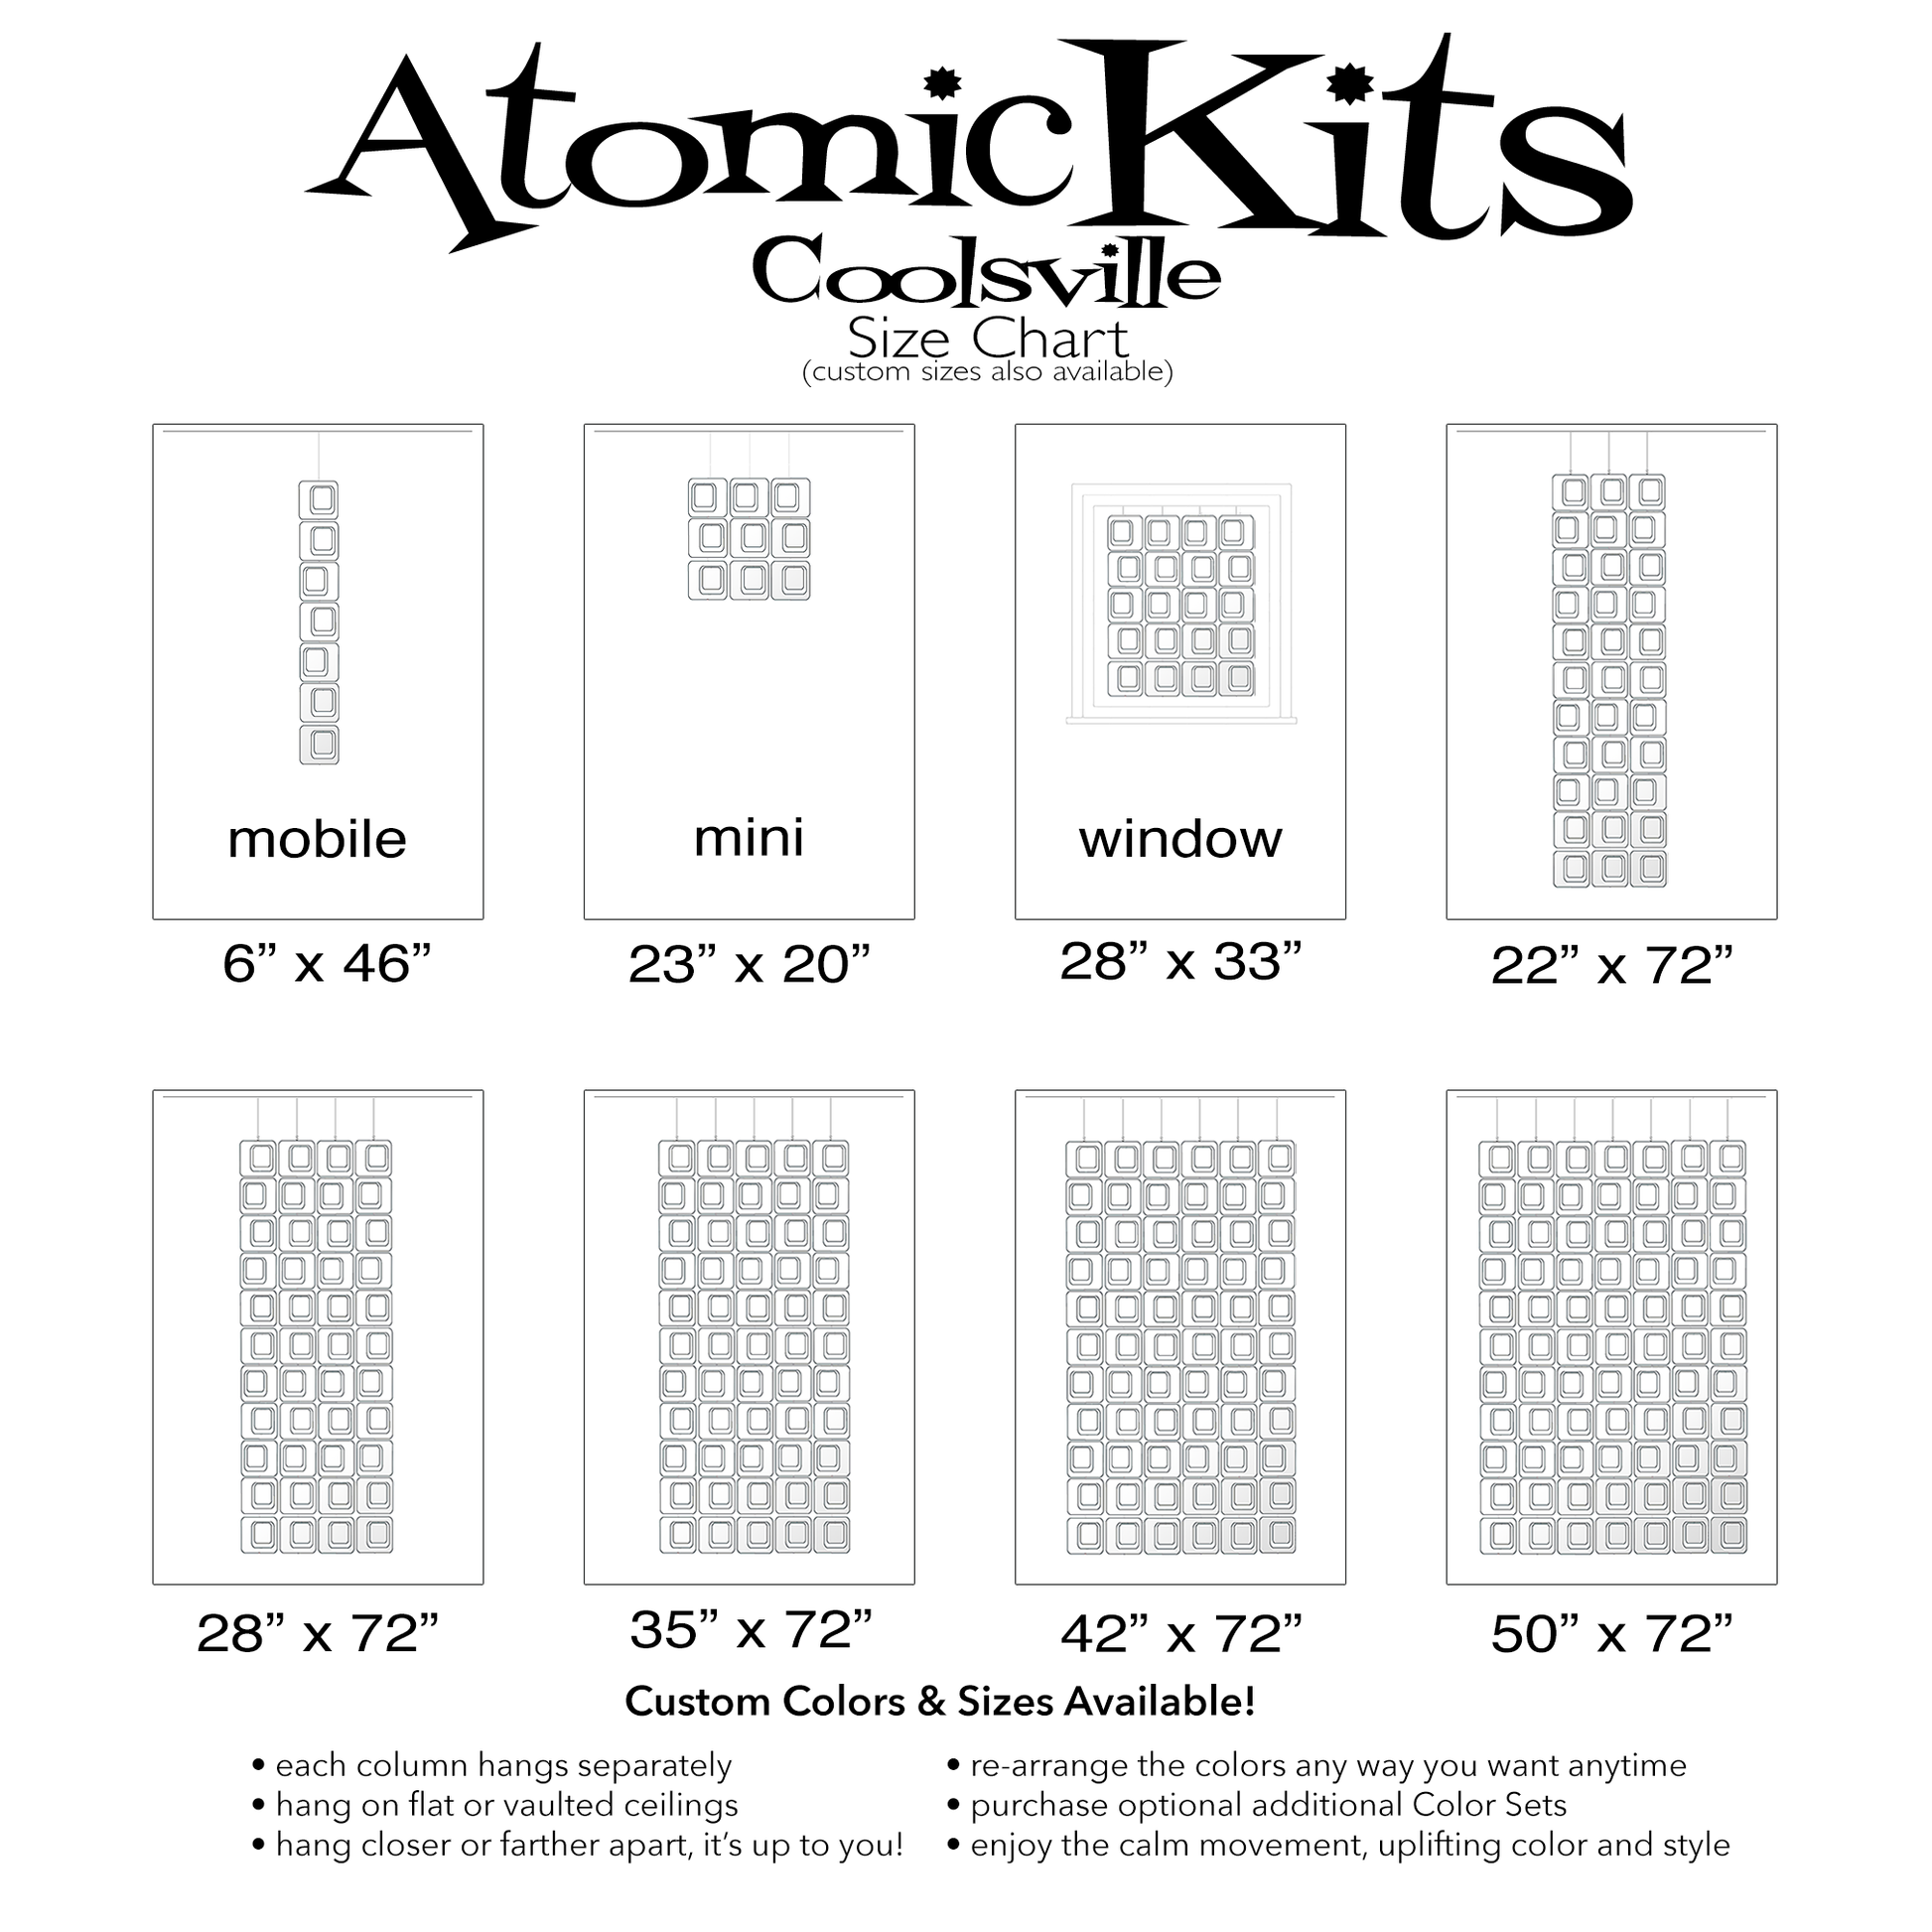 Size Chart for Coolsville DIY KIT for mobiles, room dividers, and curtains  in Clear Lucite Acrylic by AtomicMobiles.com